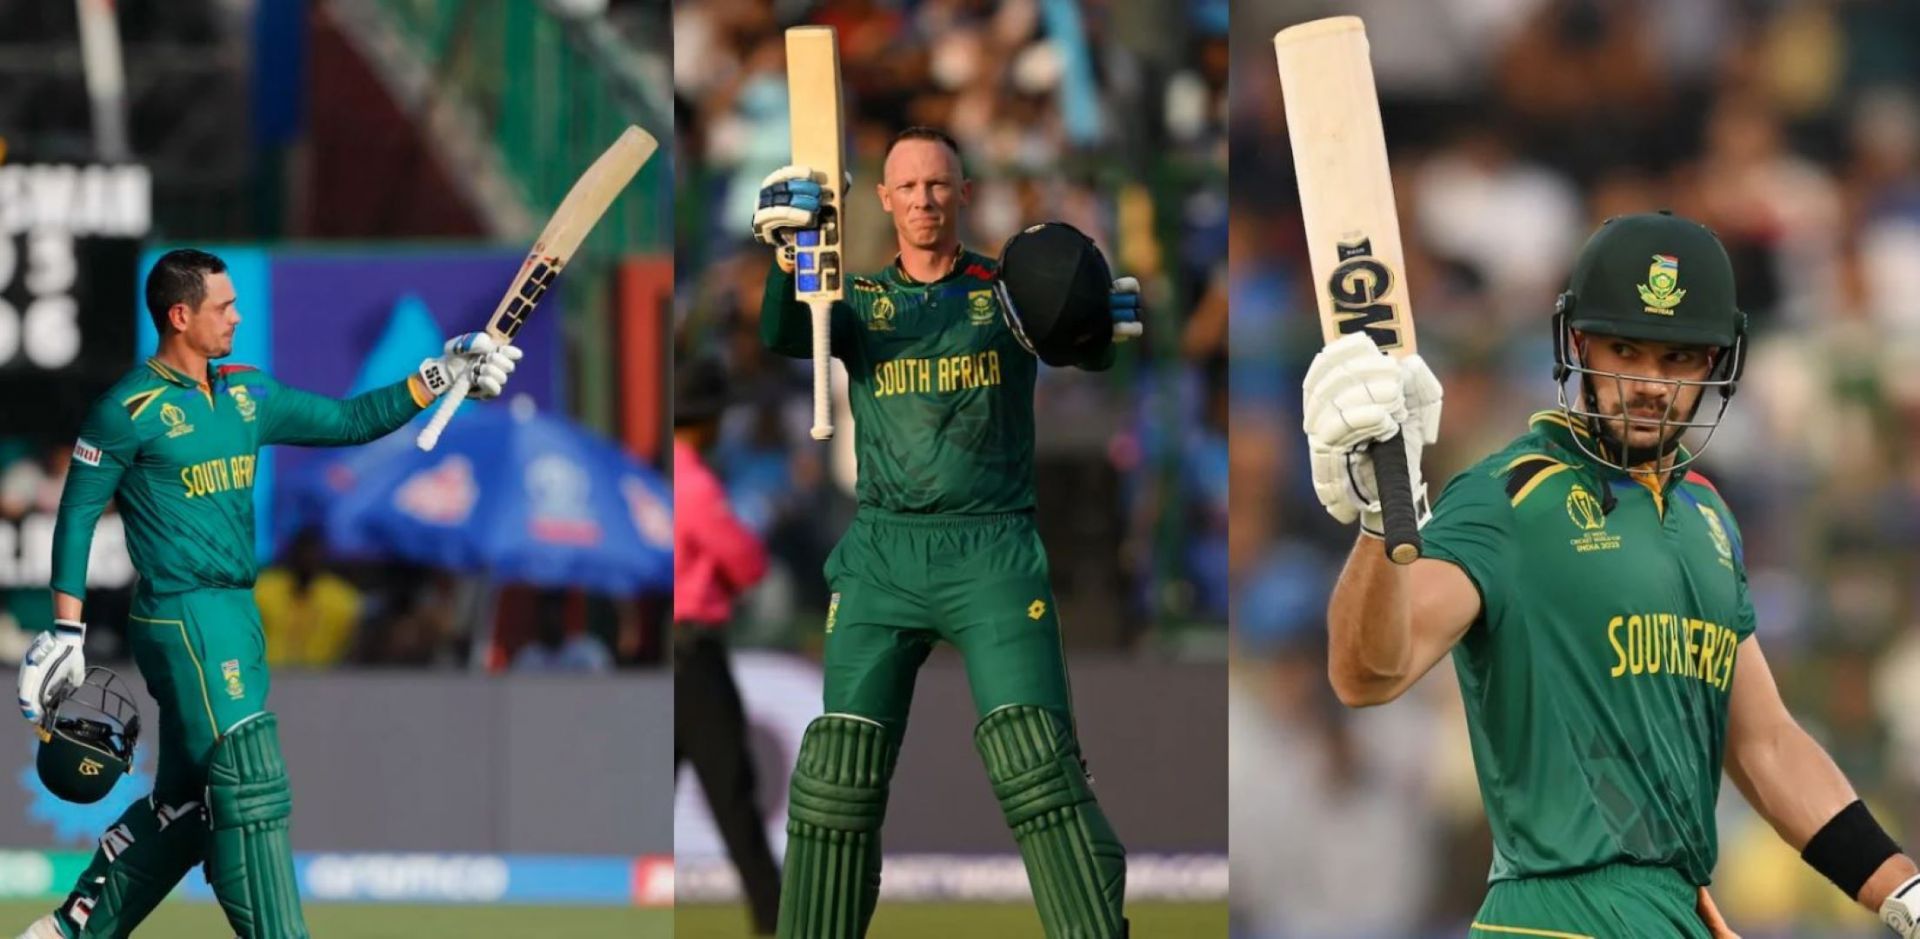 South Africa stamped their authority with another incredible batting performance in their World Cup opener